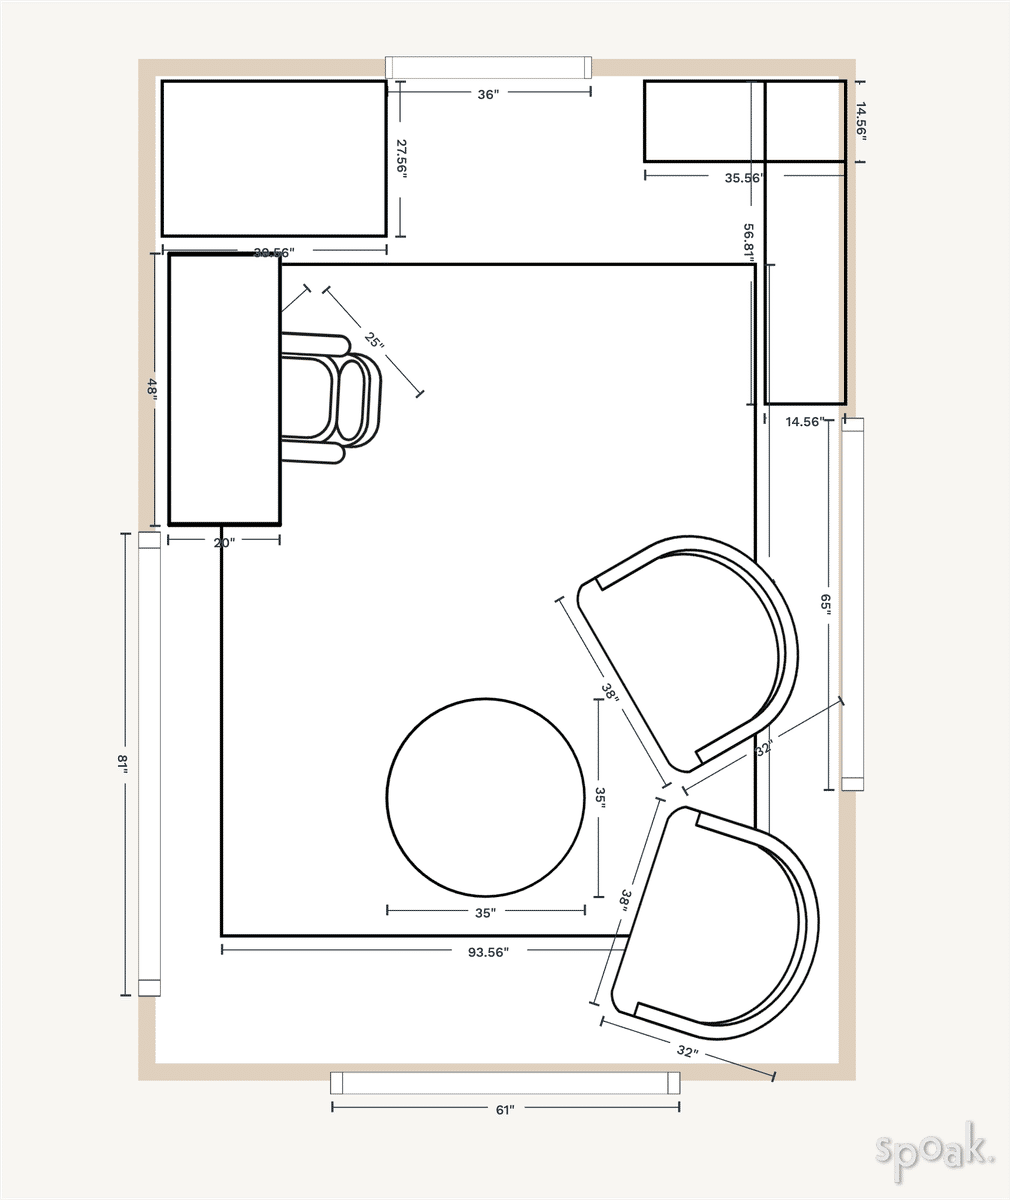 Library Layout designed by Morgan Dowling